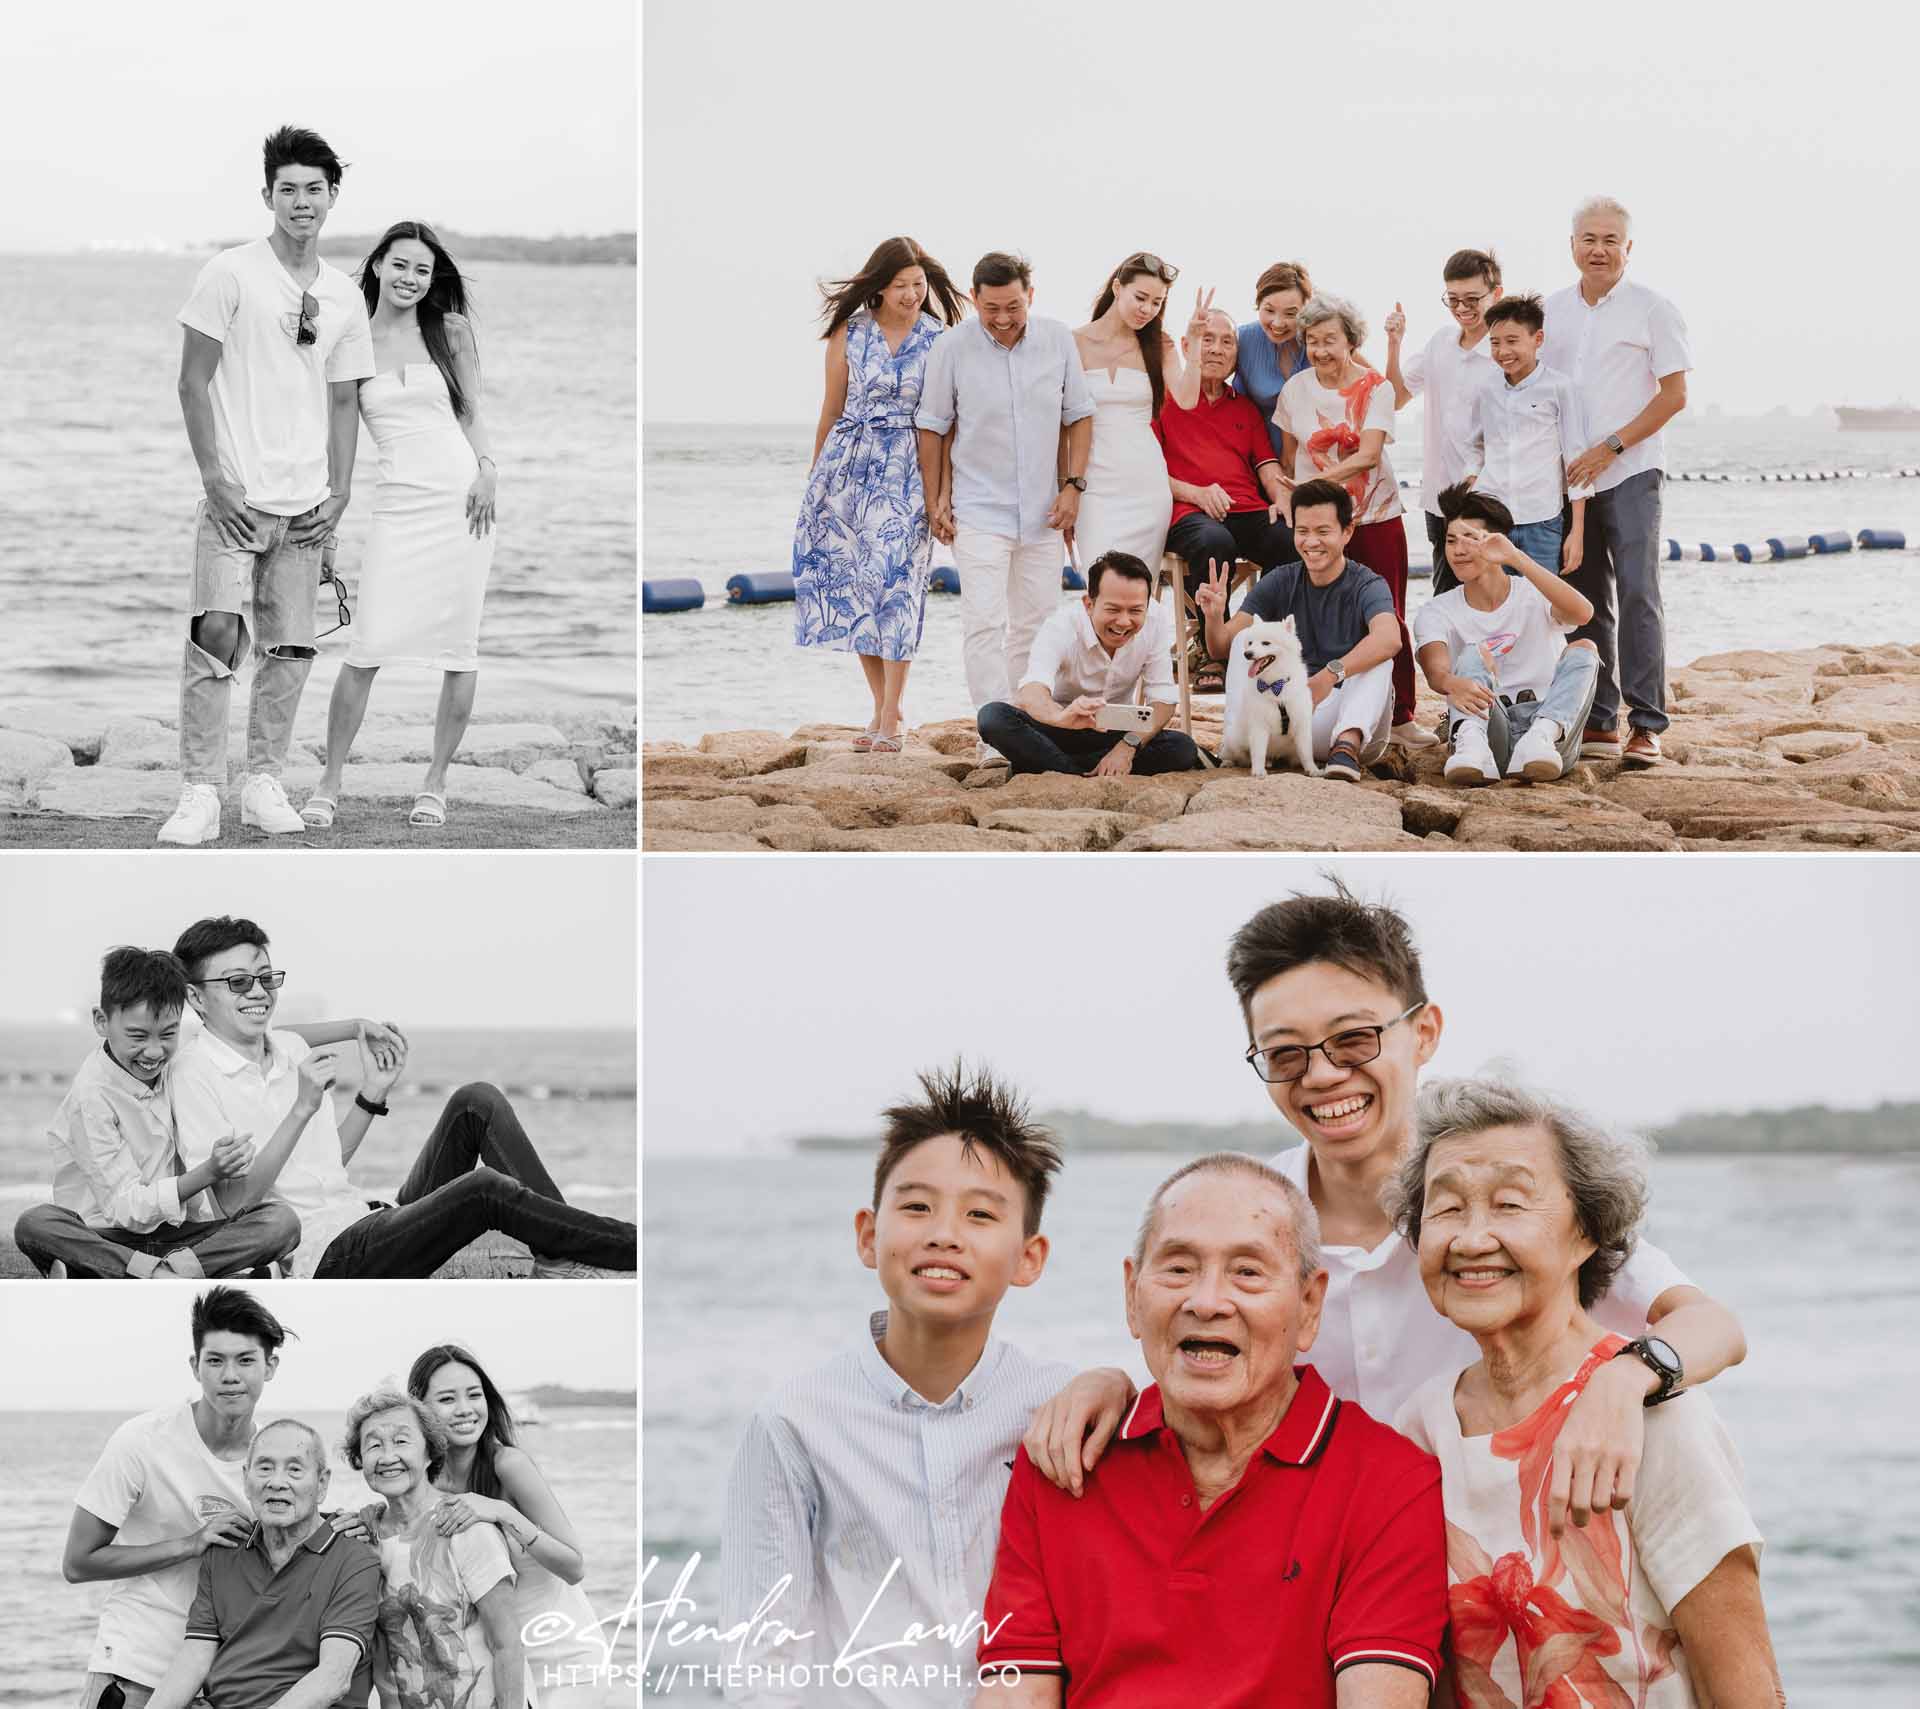 Extended family portraits at Sentosa Cove.